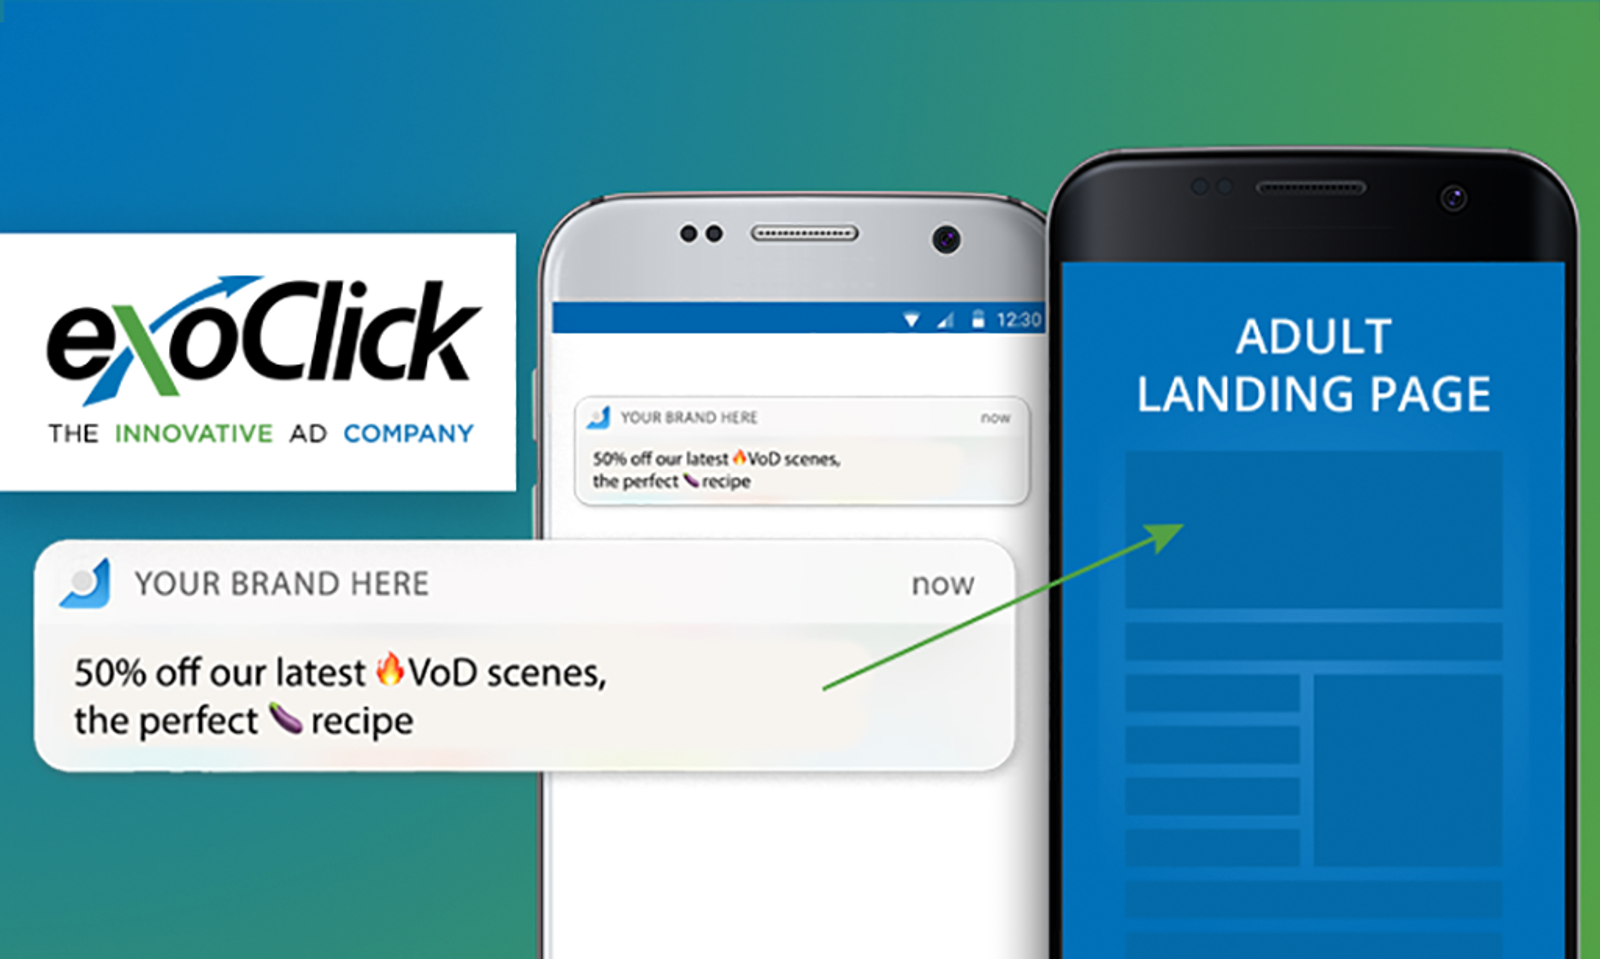 ExoClick Adds Adult Landing Pages for Push Notification Campaigns